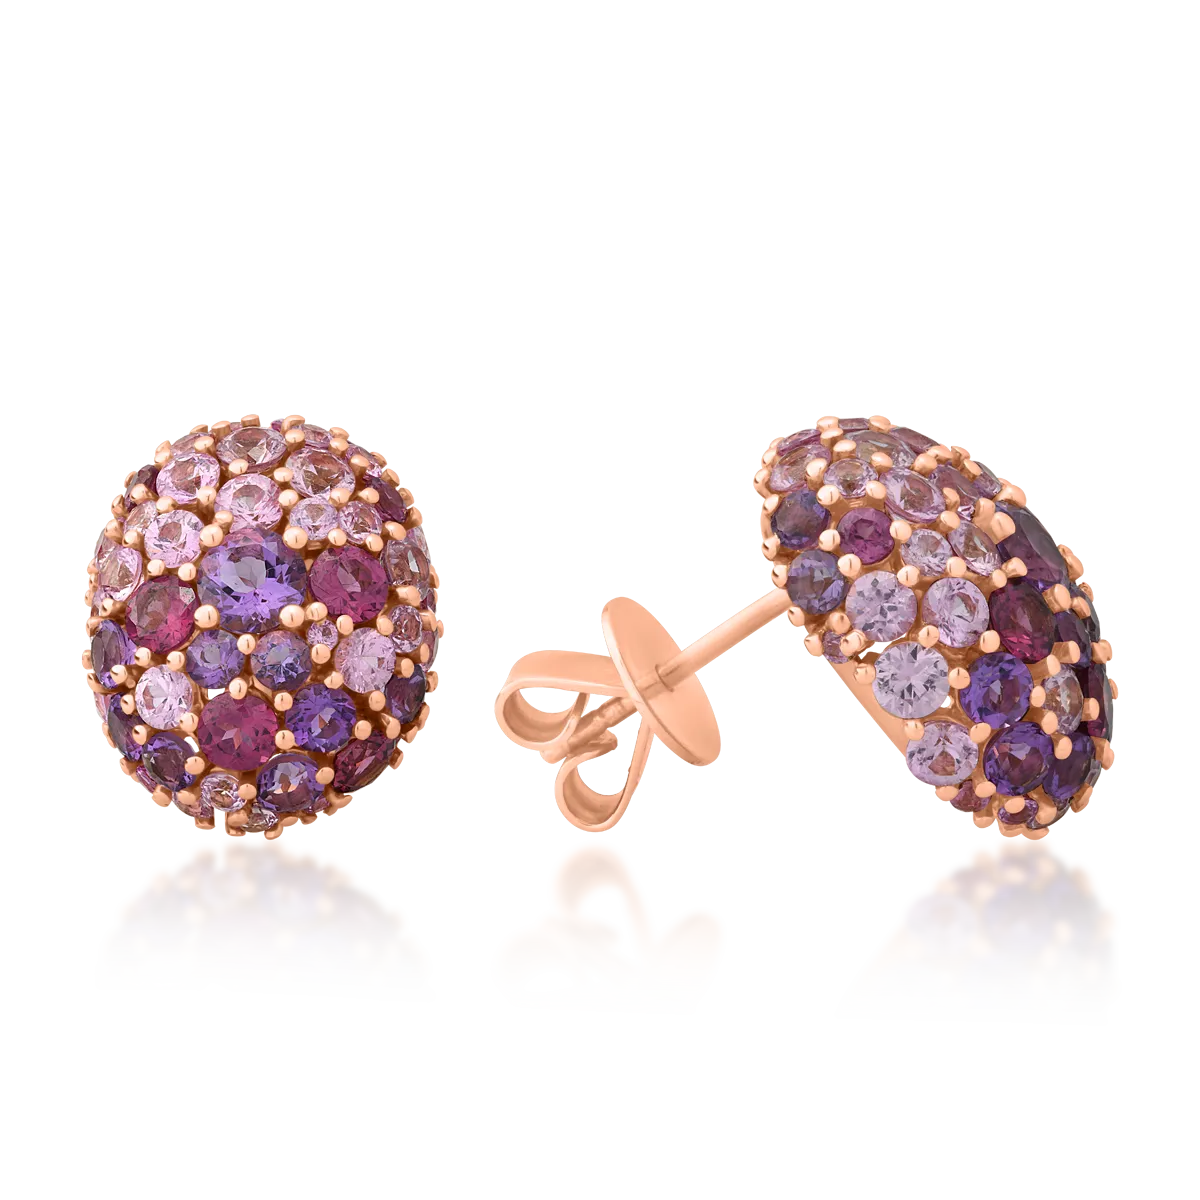 18K rose gold earrings with 1.6ct amethysts and 1.6ct rhodolites